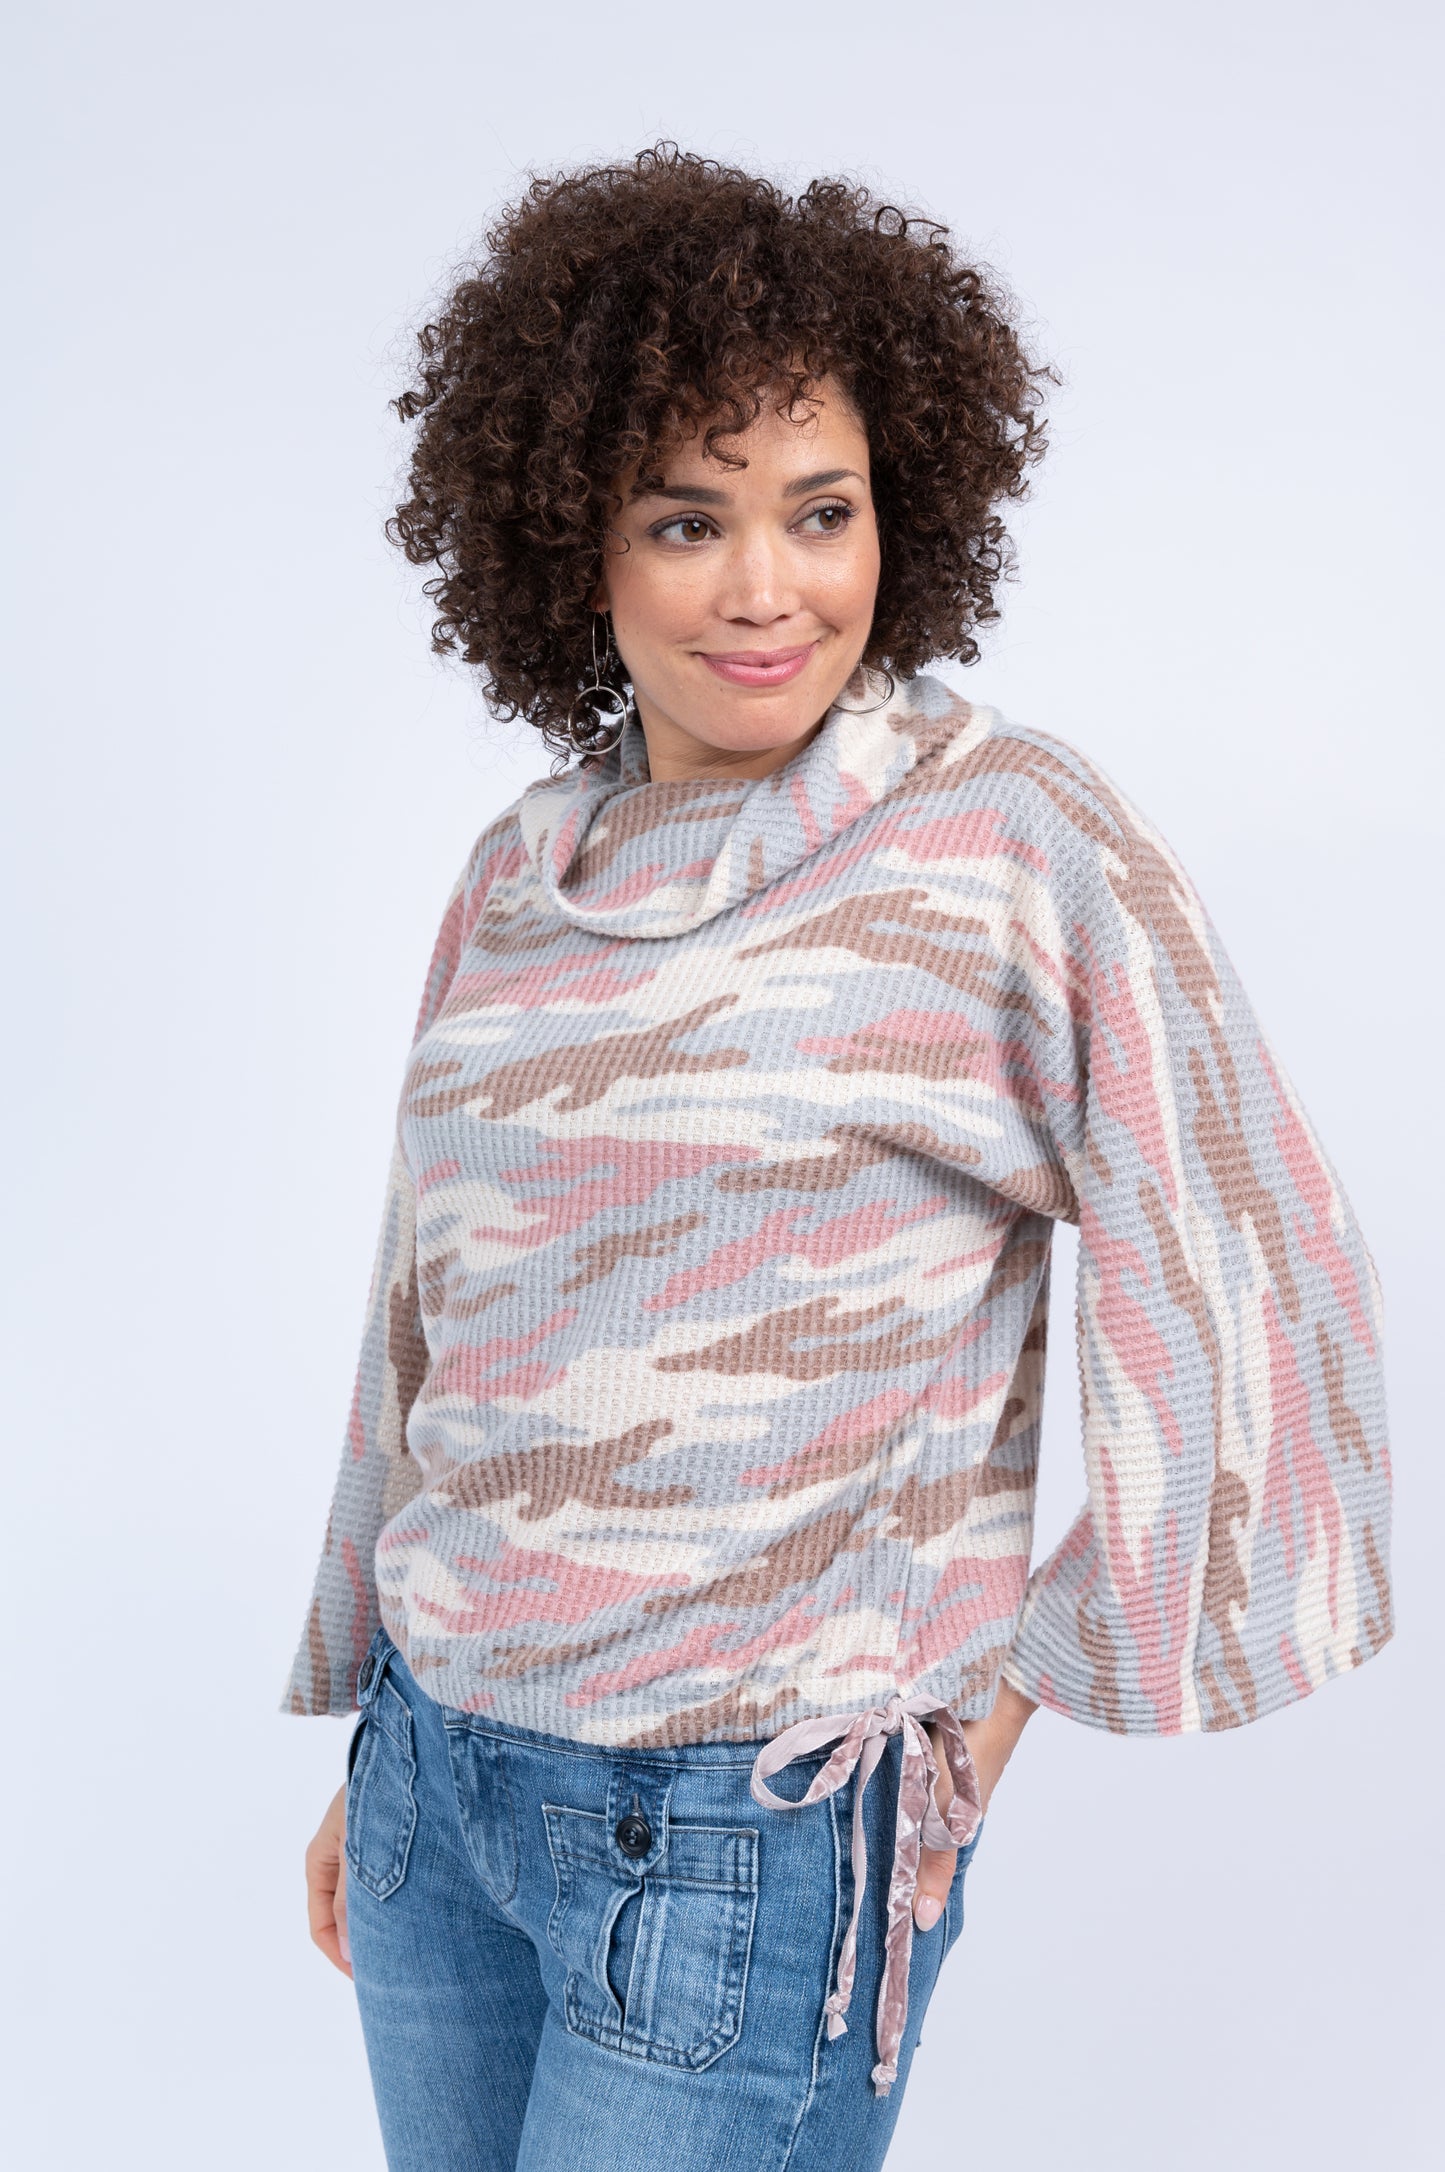 Ivy Jane Pastel Camo Thermal Top 6Whiskey Winter 2020